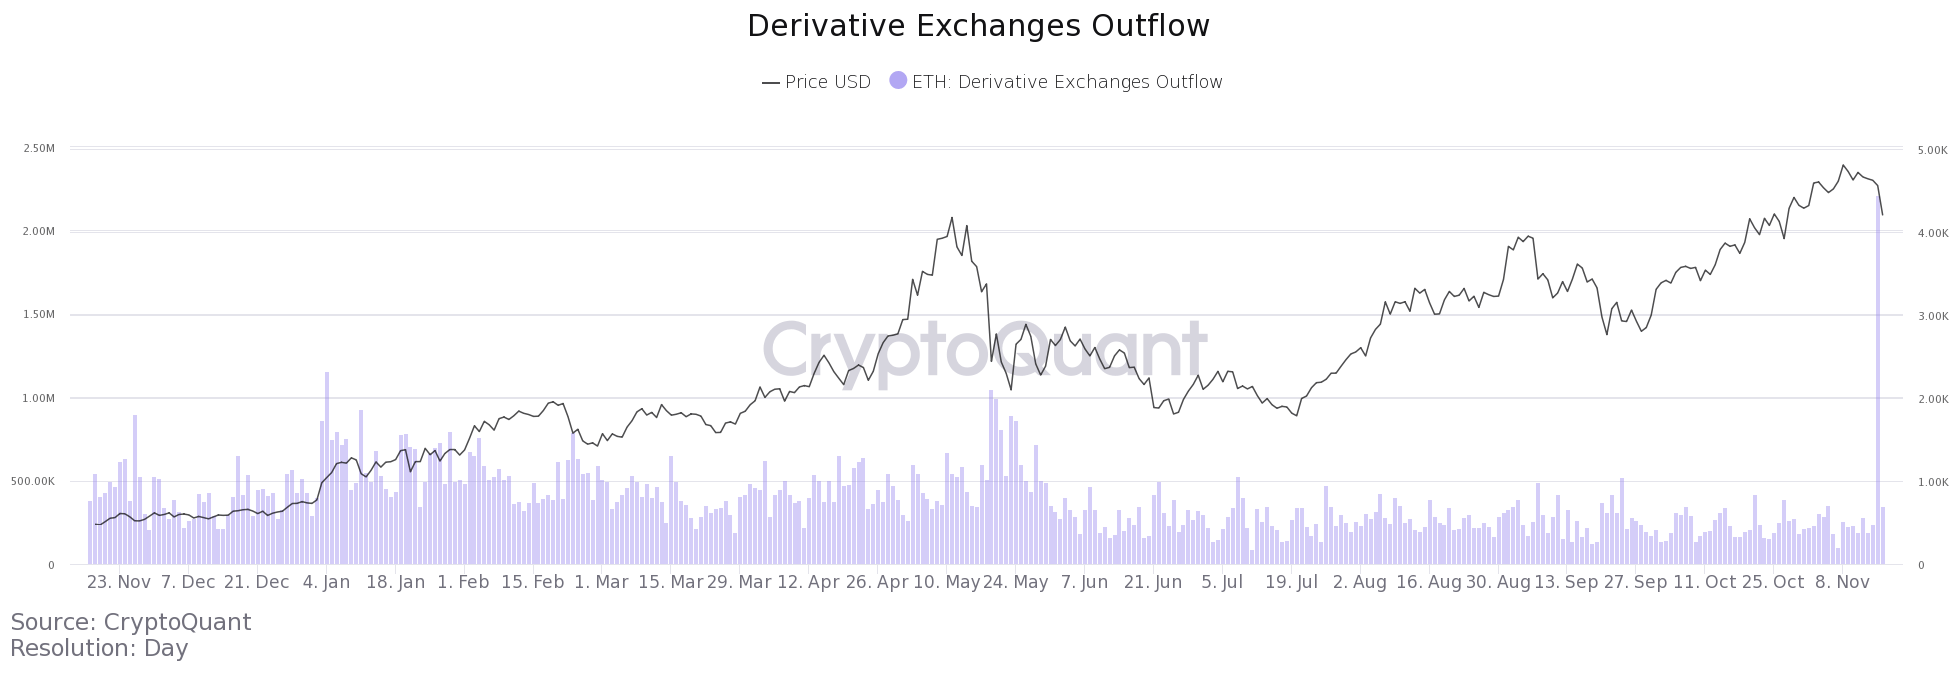 Graph showing Ethereum's derivative exchange outflows from January 1st, 2021 to November 16th, 2021 (Source: CryptoQuant)